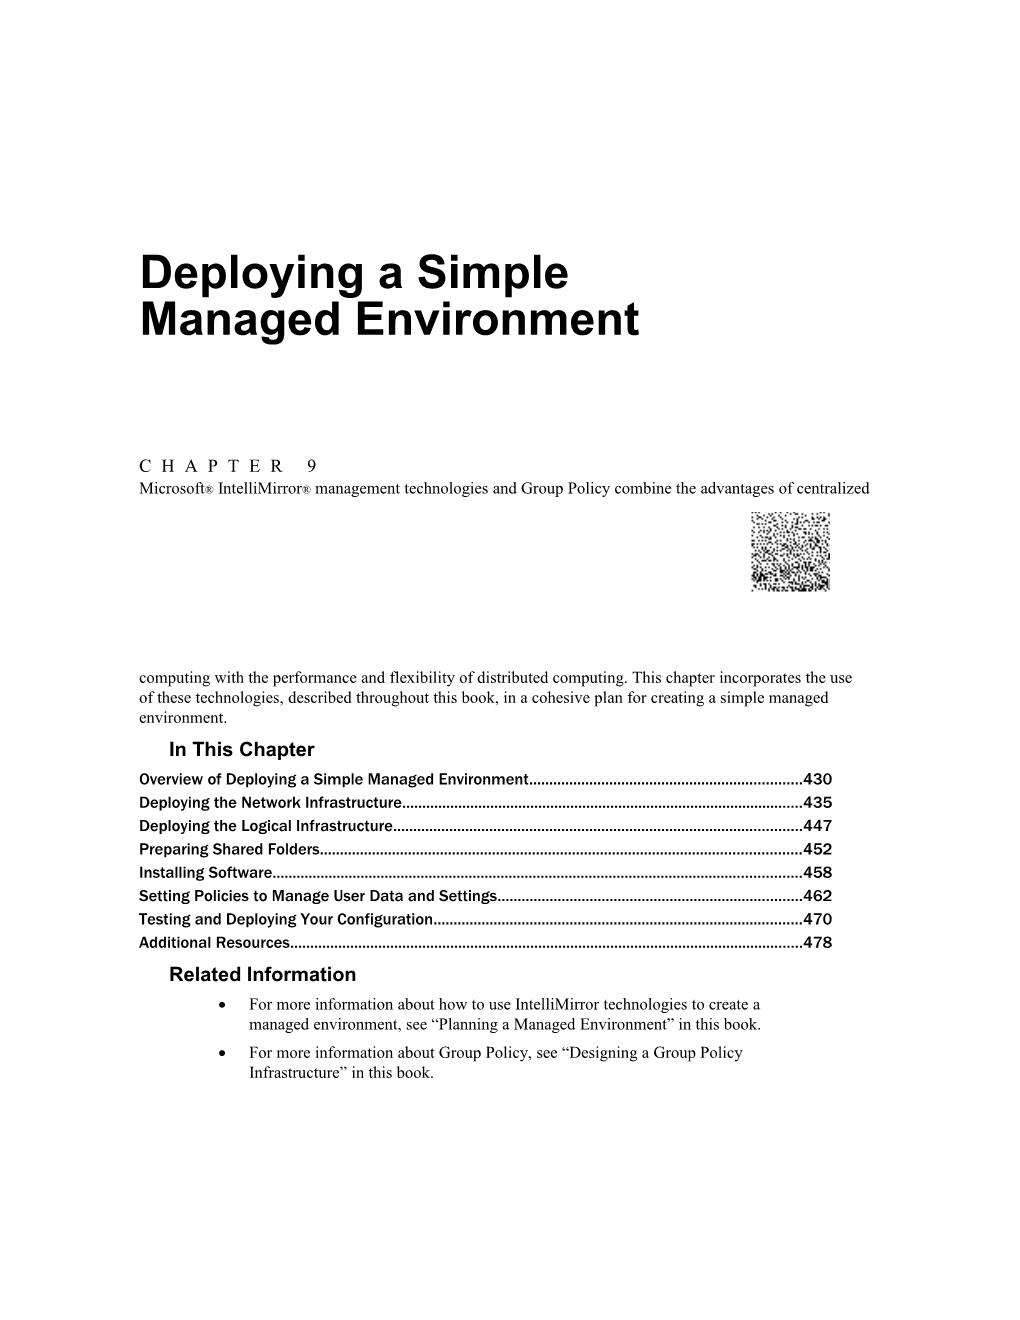 11 CHAPTER 9 Deploying a Simple Managed Environment